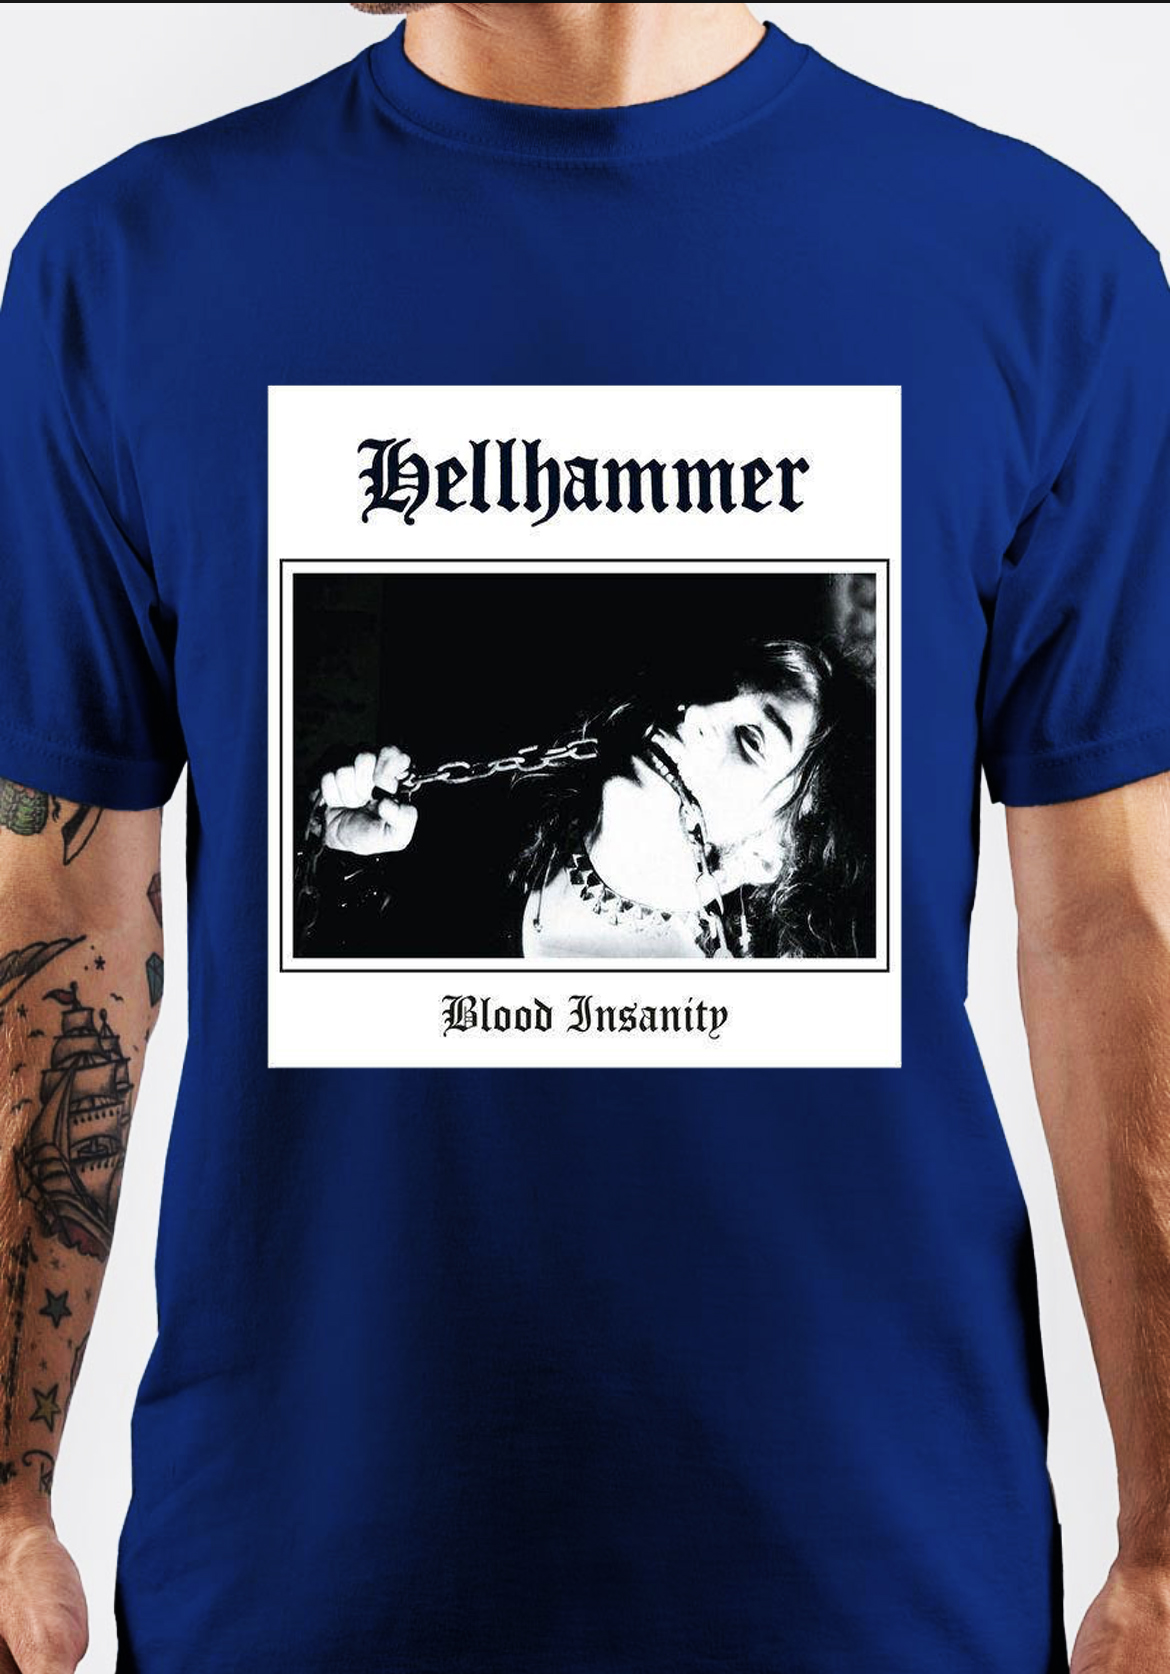 Hellhammer T-Shirt And Merchandise